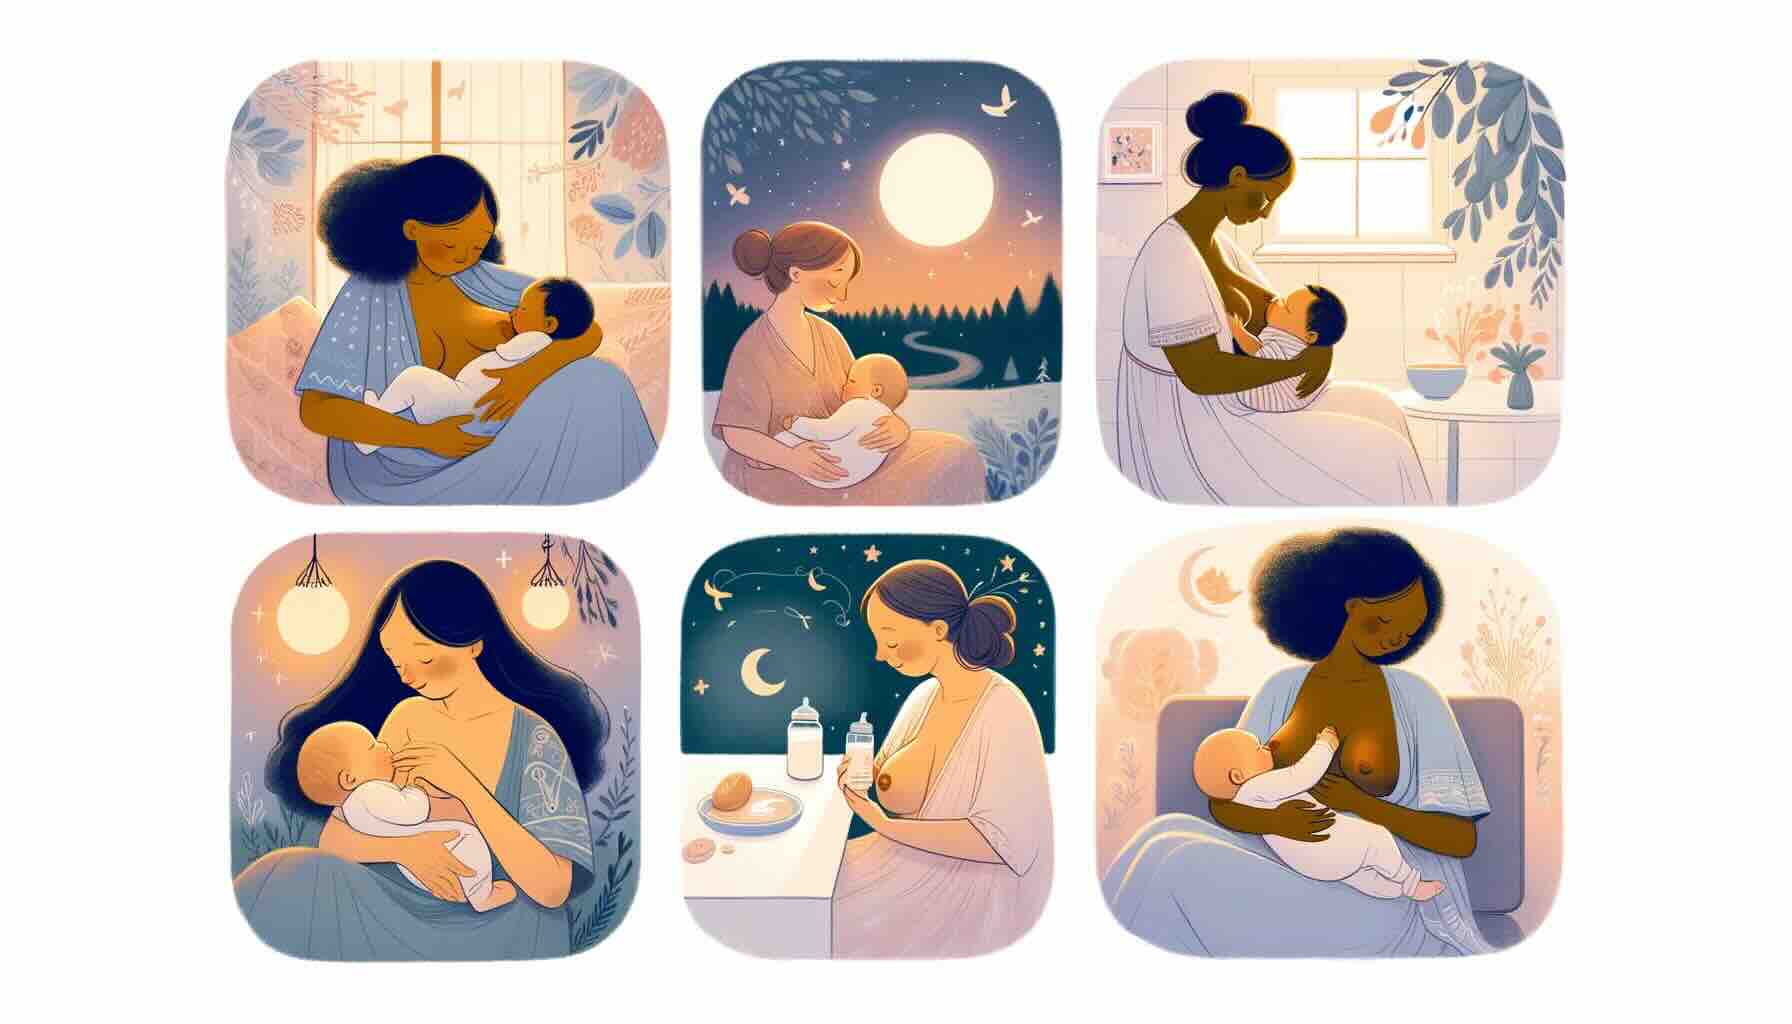 Memorable Moments Most Breastfeeding Moms Can Relate To